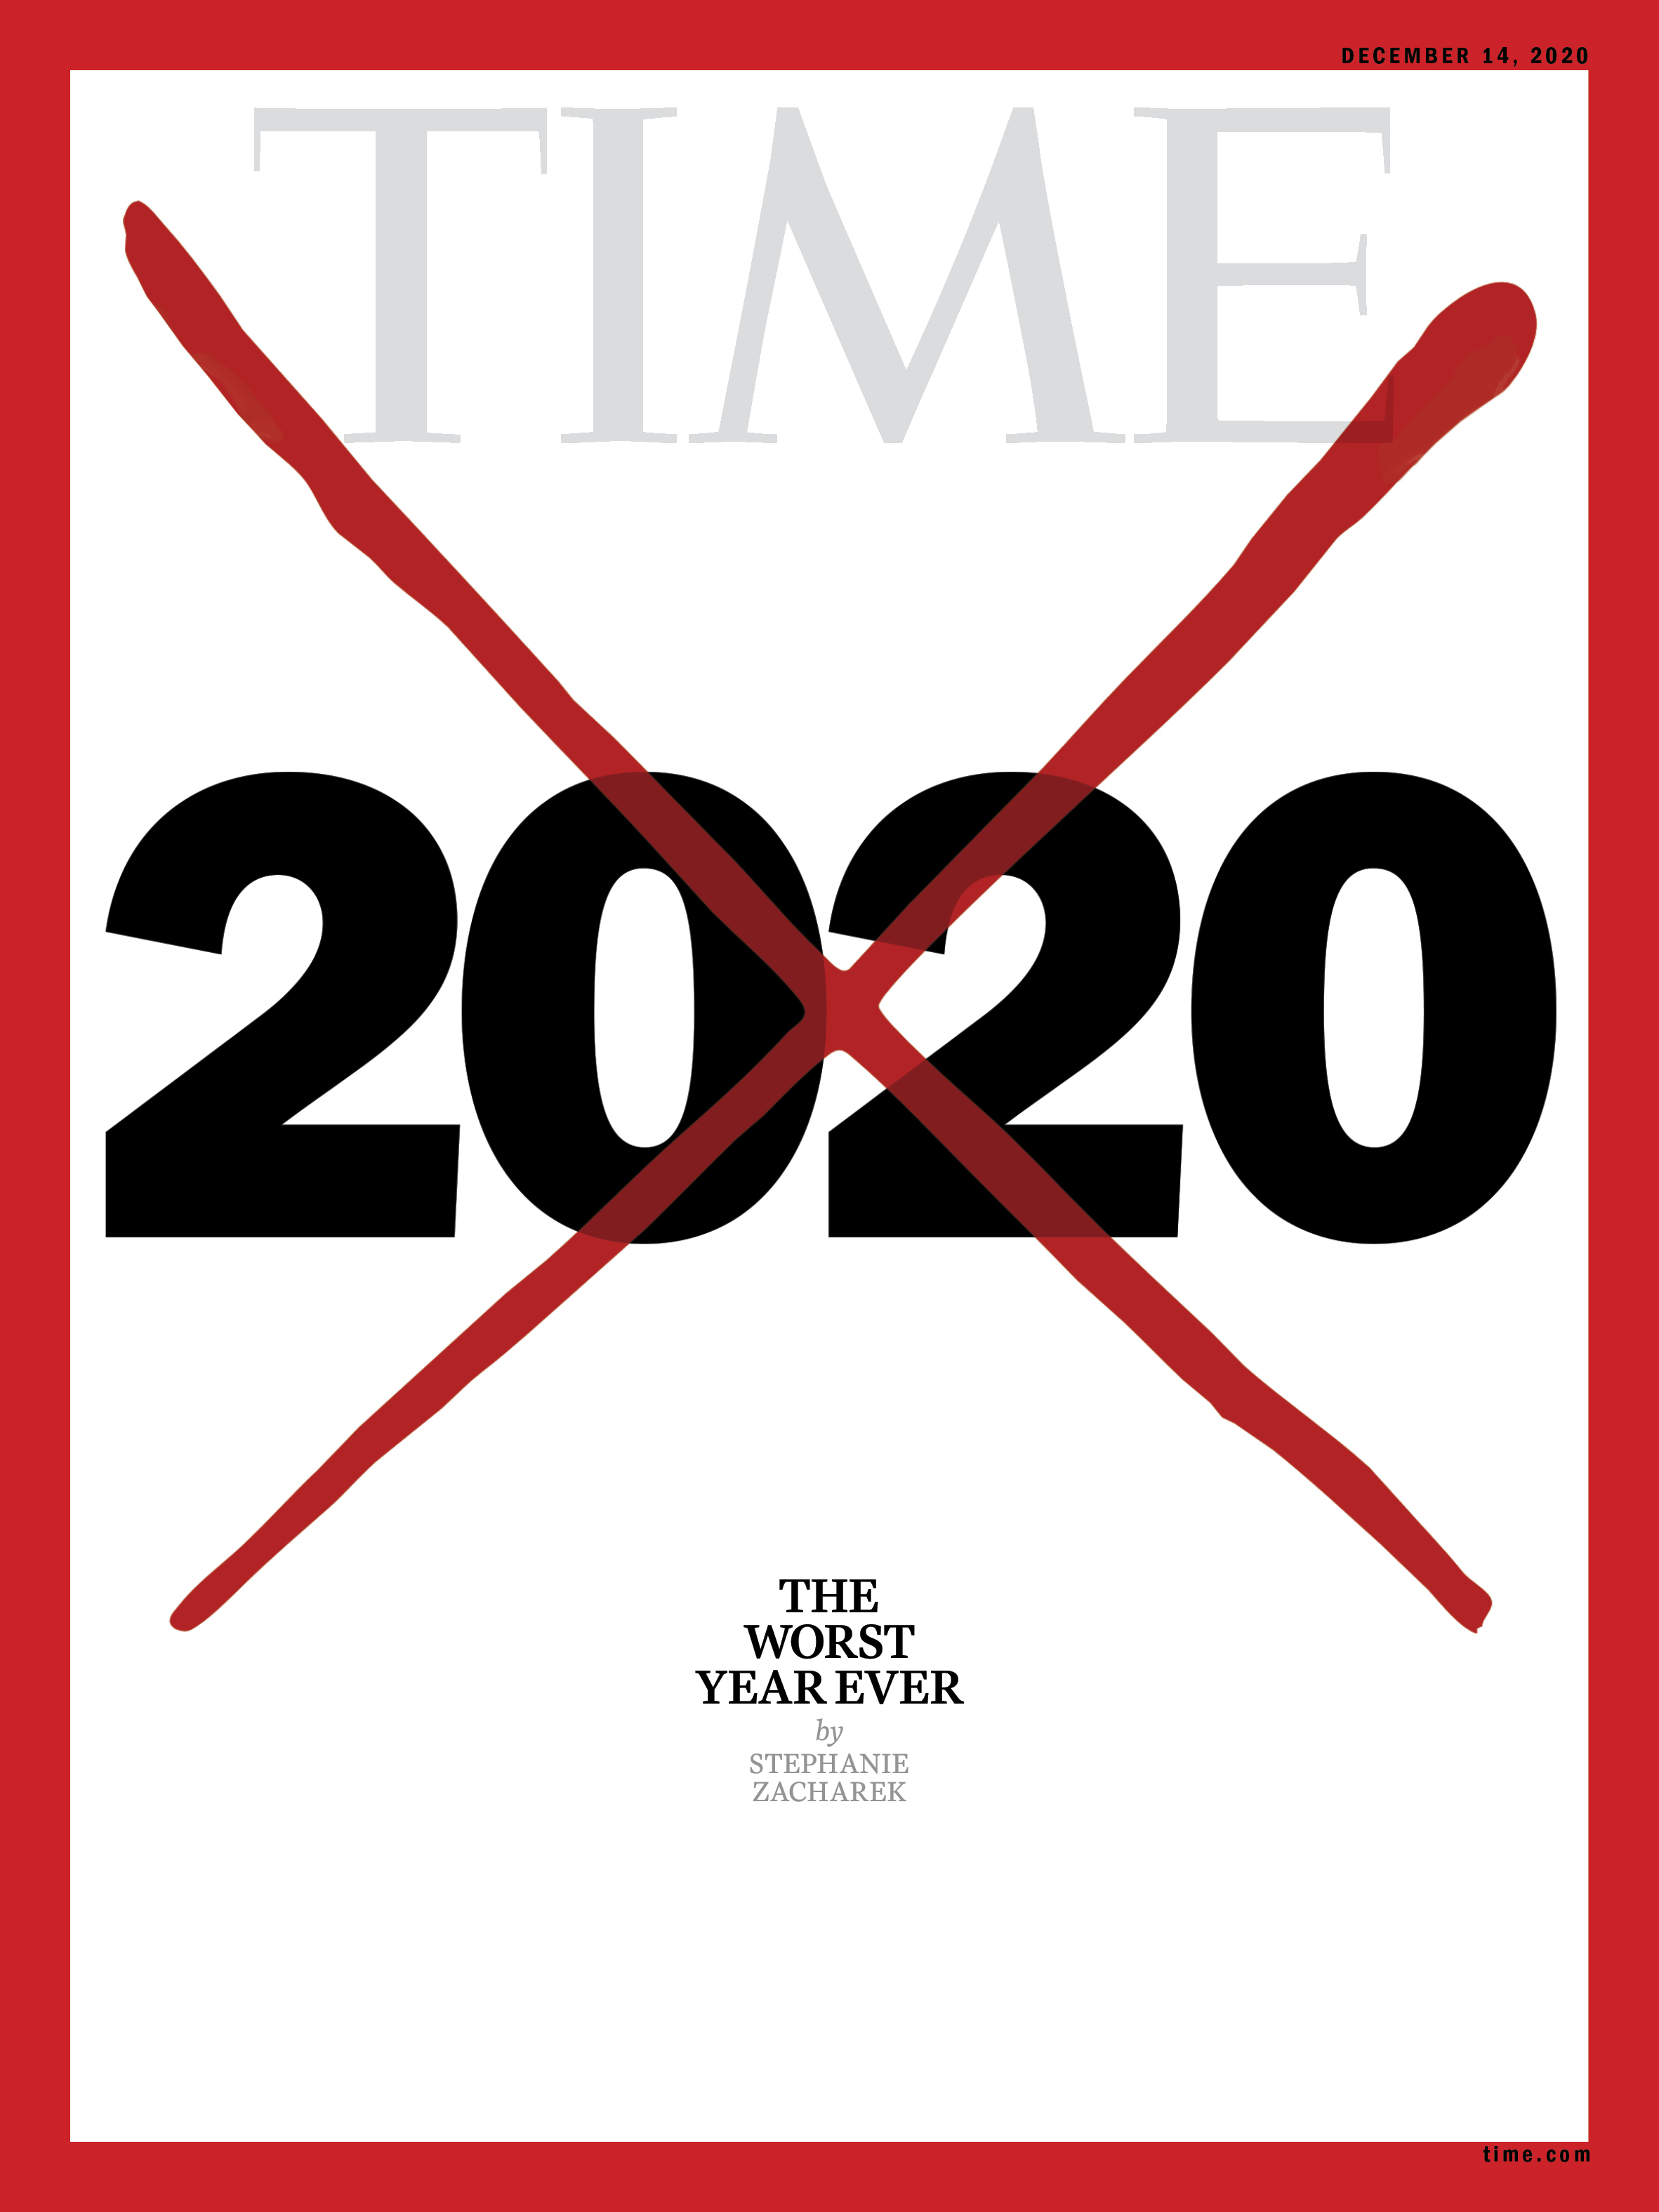 2020 Tested Us Beyond Measure Where Do We Go From Here Time